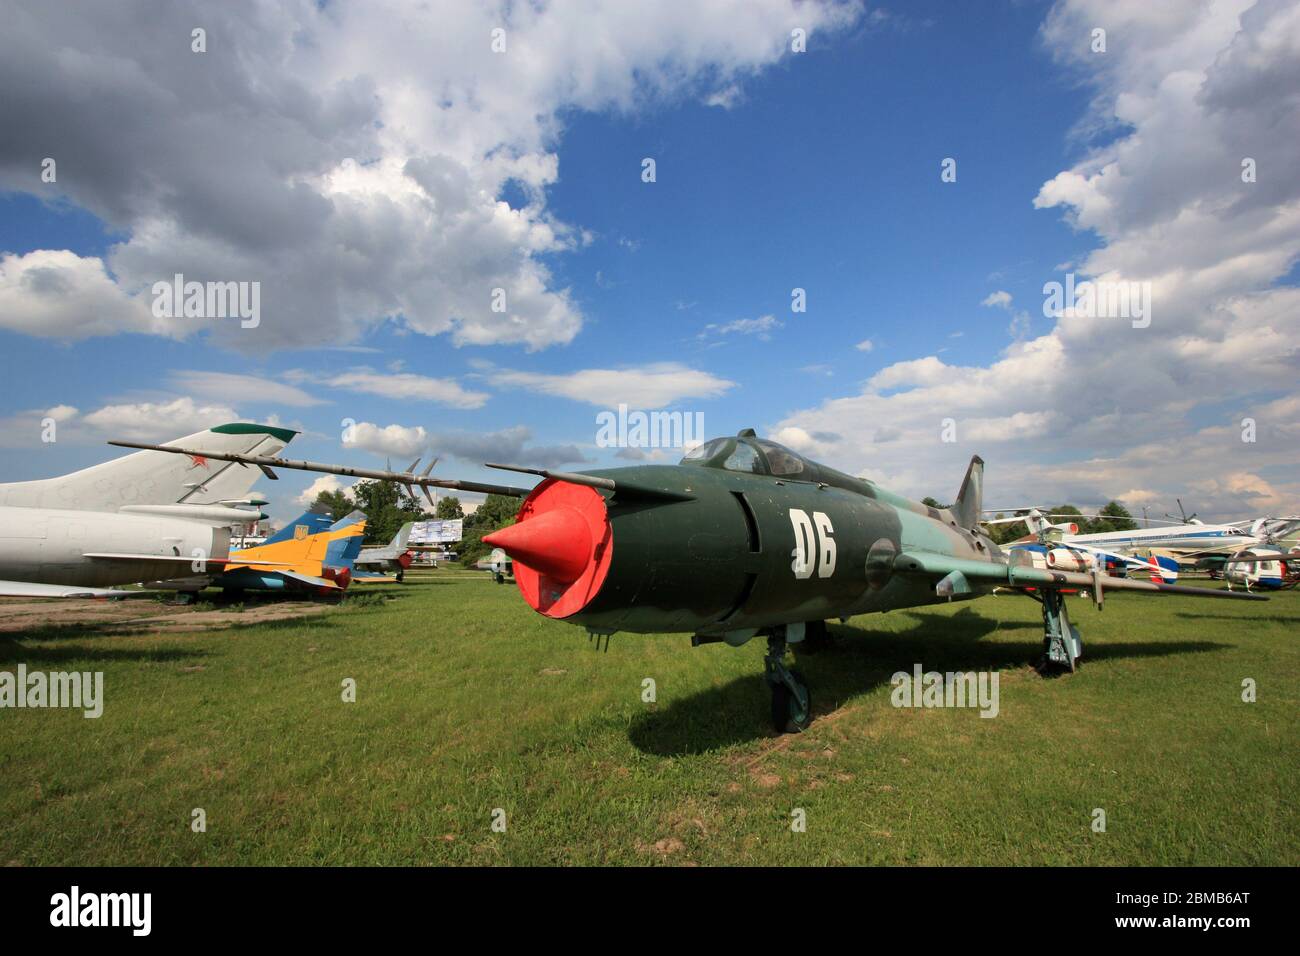 Exterior view of a Sukhoi Su-20 "Fitter-C" (Su-17 export version) variable-sweep wing fighter-bomber at the Zhulyany State Aviation Museum of Ukraine Stock Photo